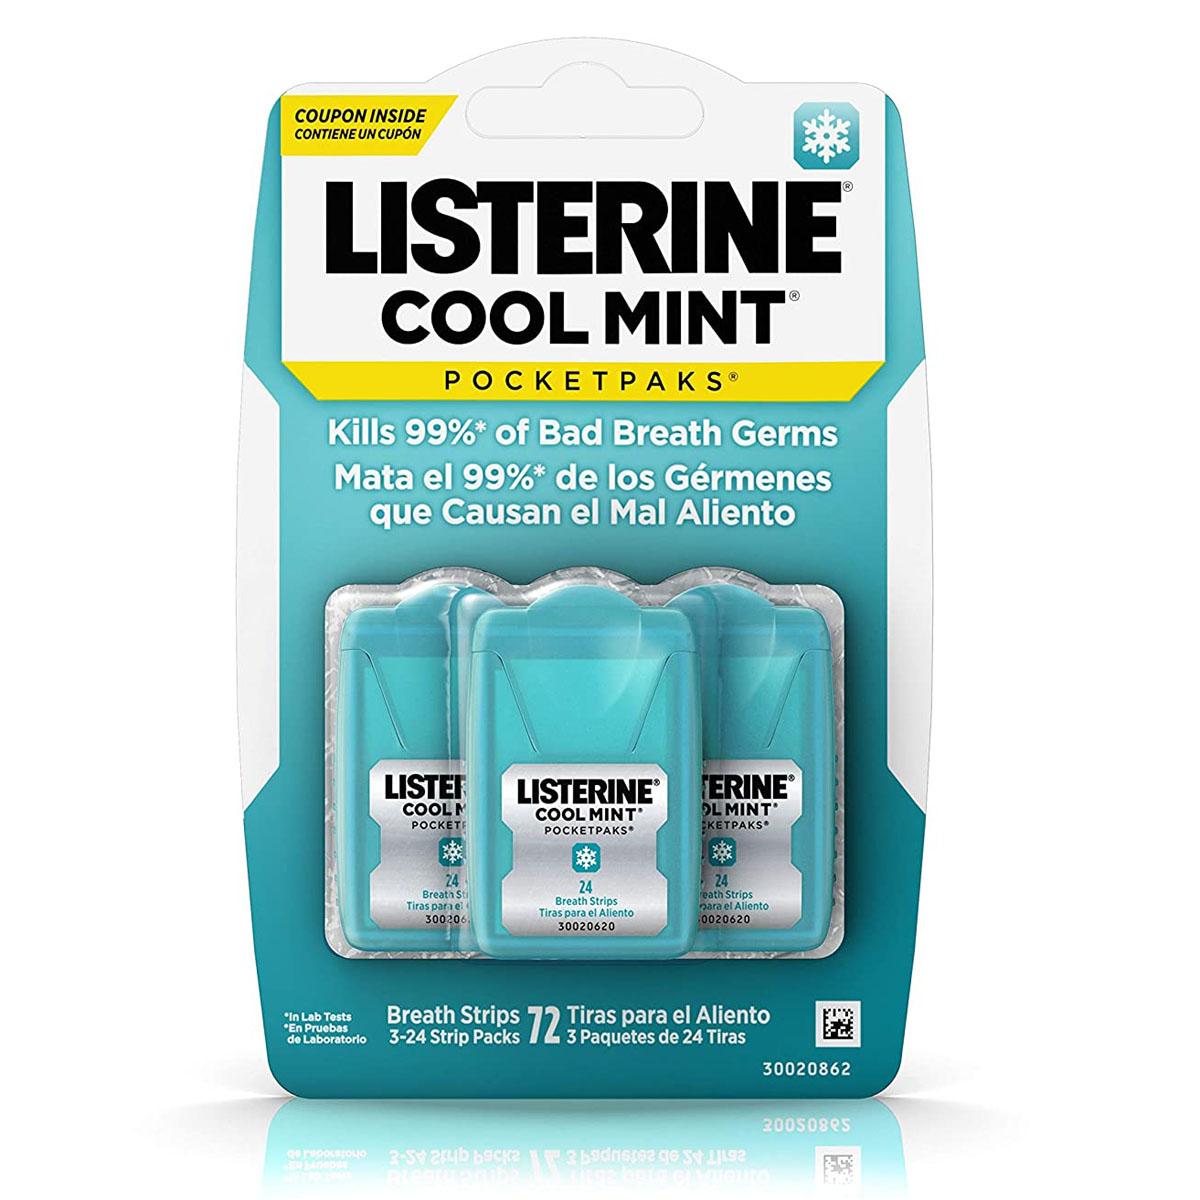 3 Listerine Cool Mint Pocketpaks Breath Strips for $2.45 Shipped